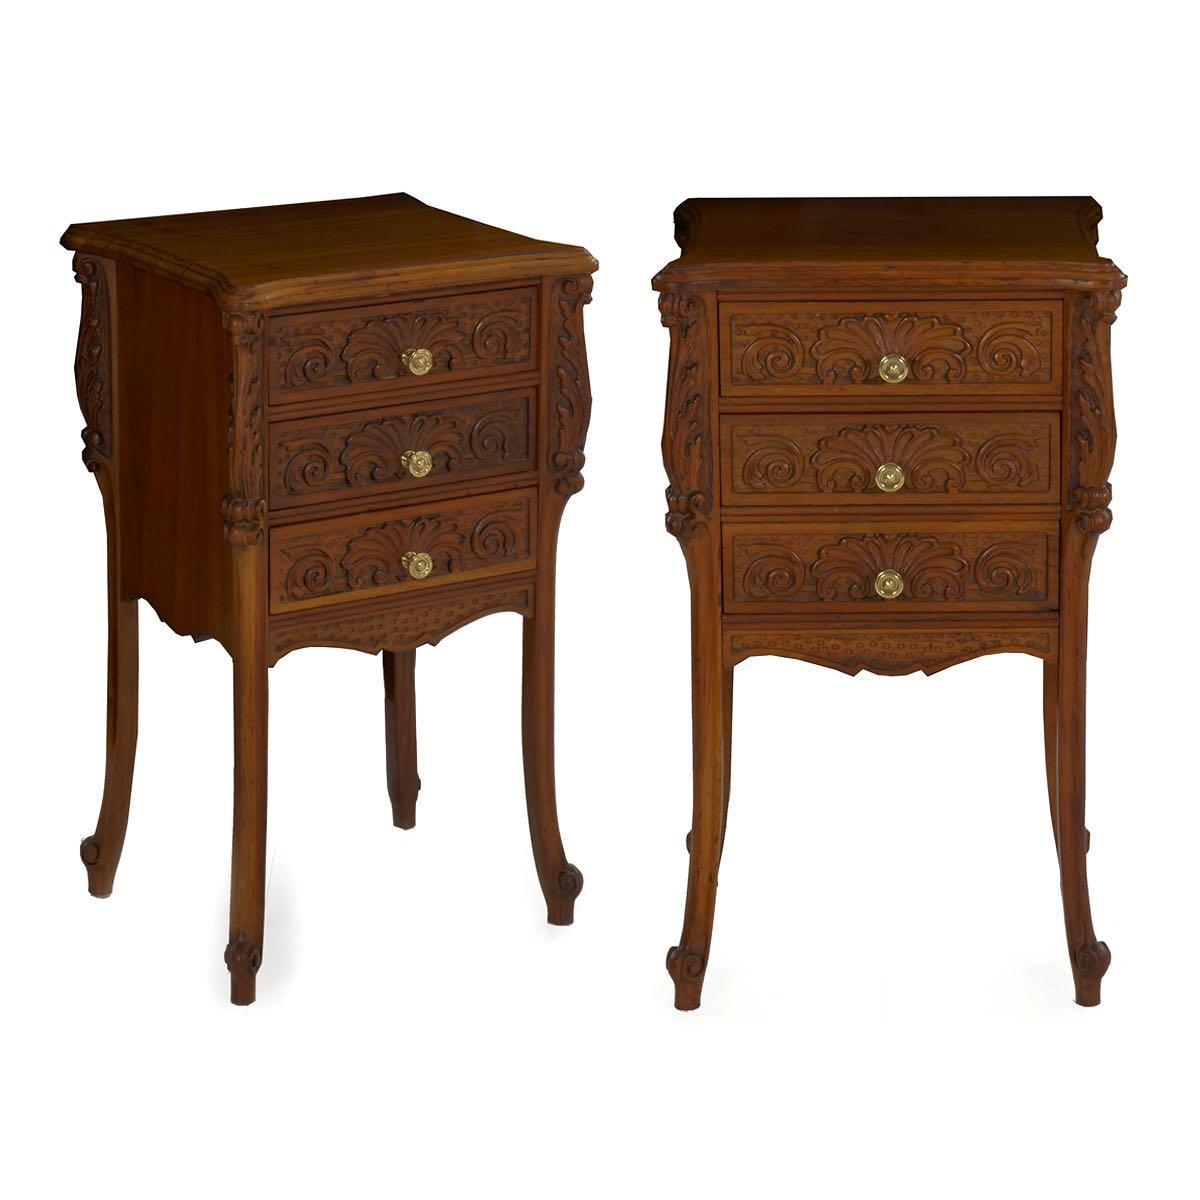 Pair of Art Nouveau carved walnut nightstand tables,
France, circa early 20th century
Item # 007ZFY30

A fantastic matched pair of early 20th century nightstand tables, each is crafted out of dense walnut solid primary woods and feature a